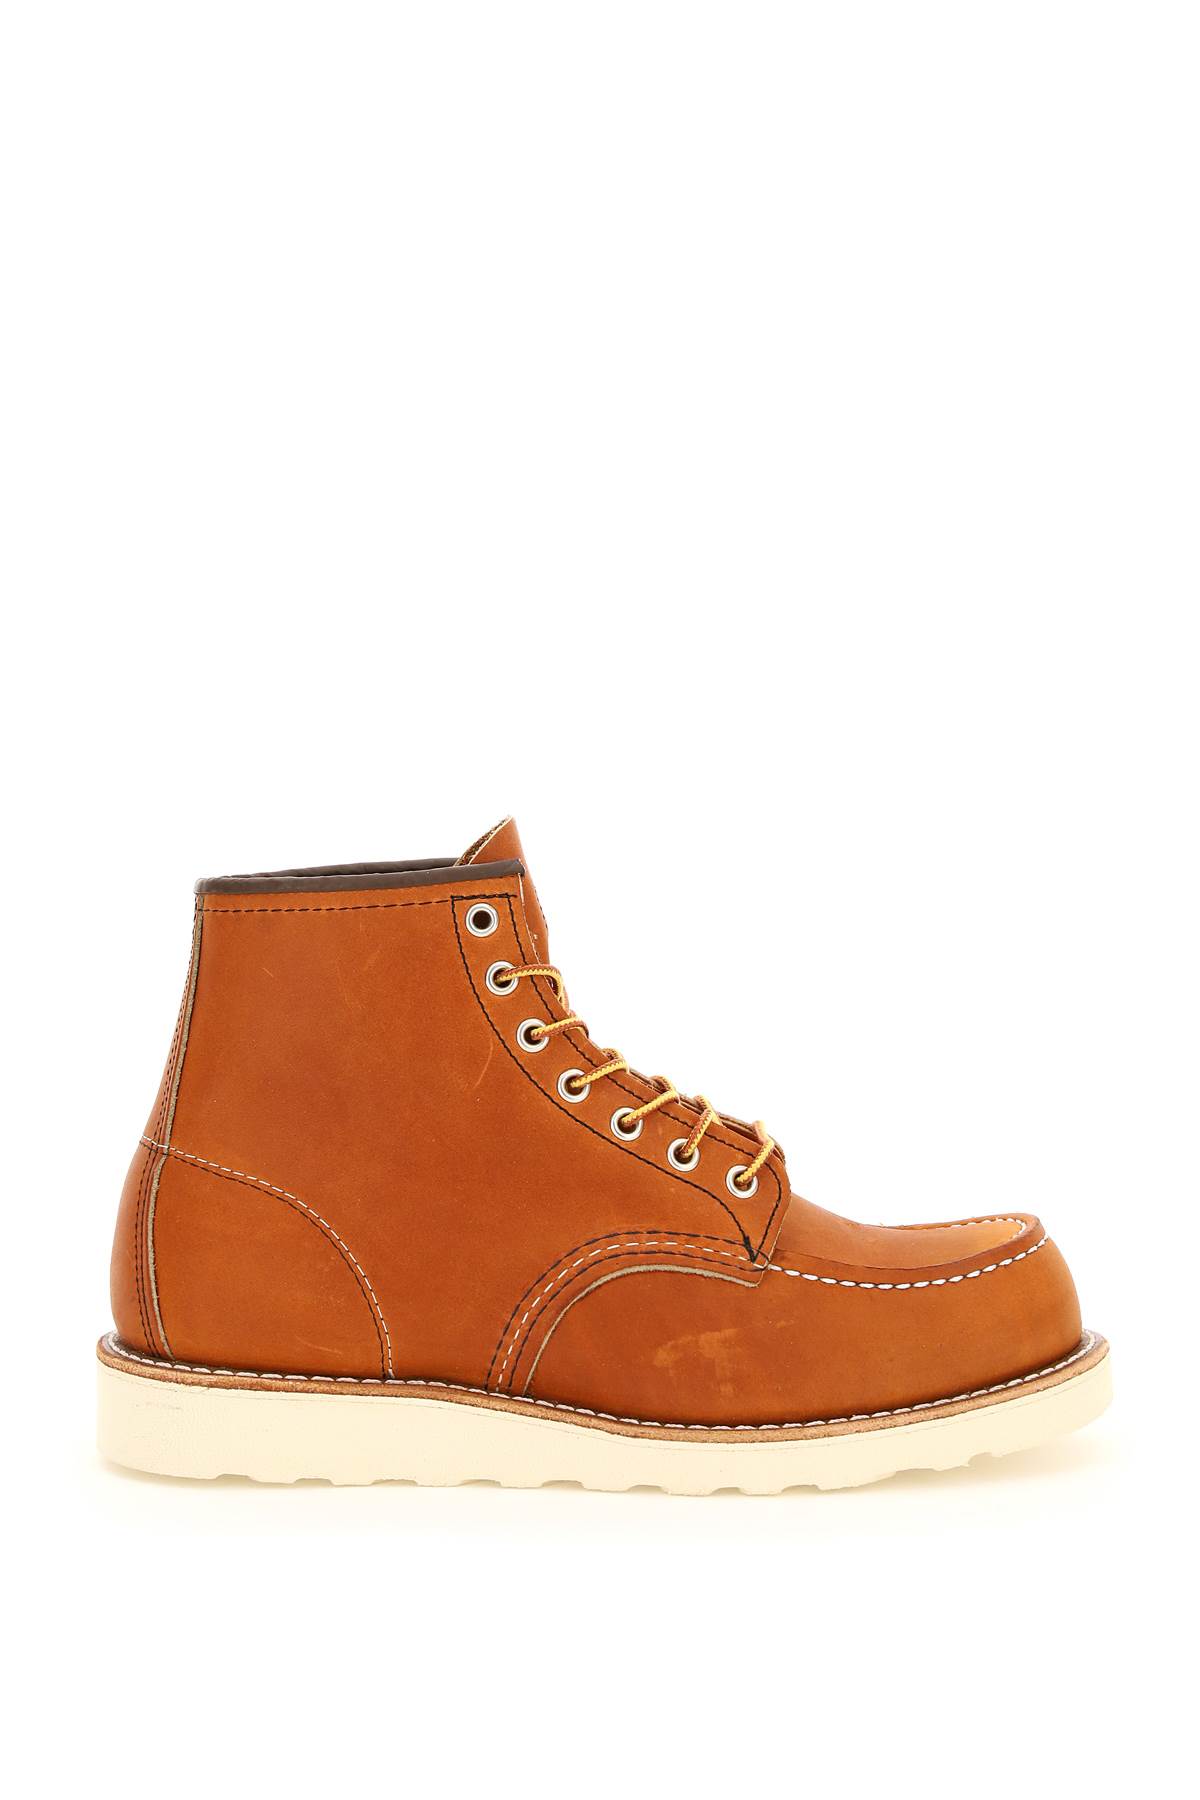 Men's RED WING Boots Sale | ModeSens